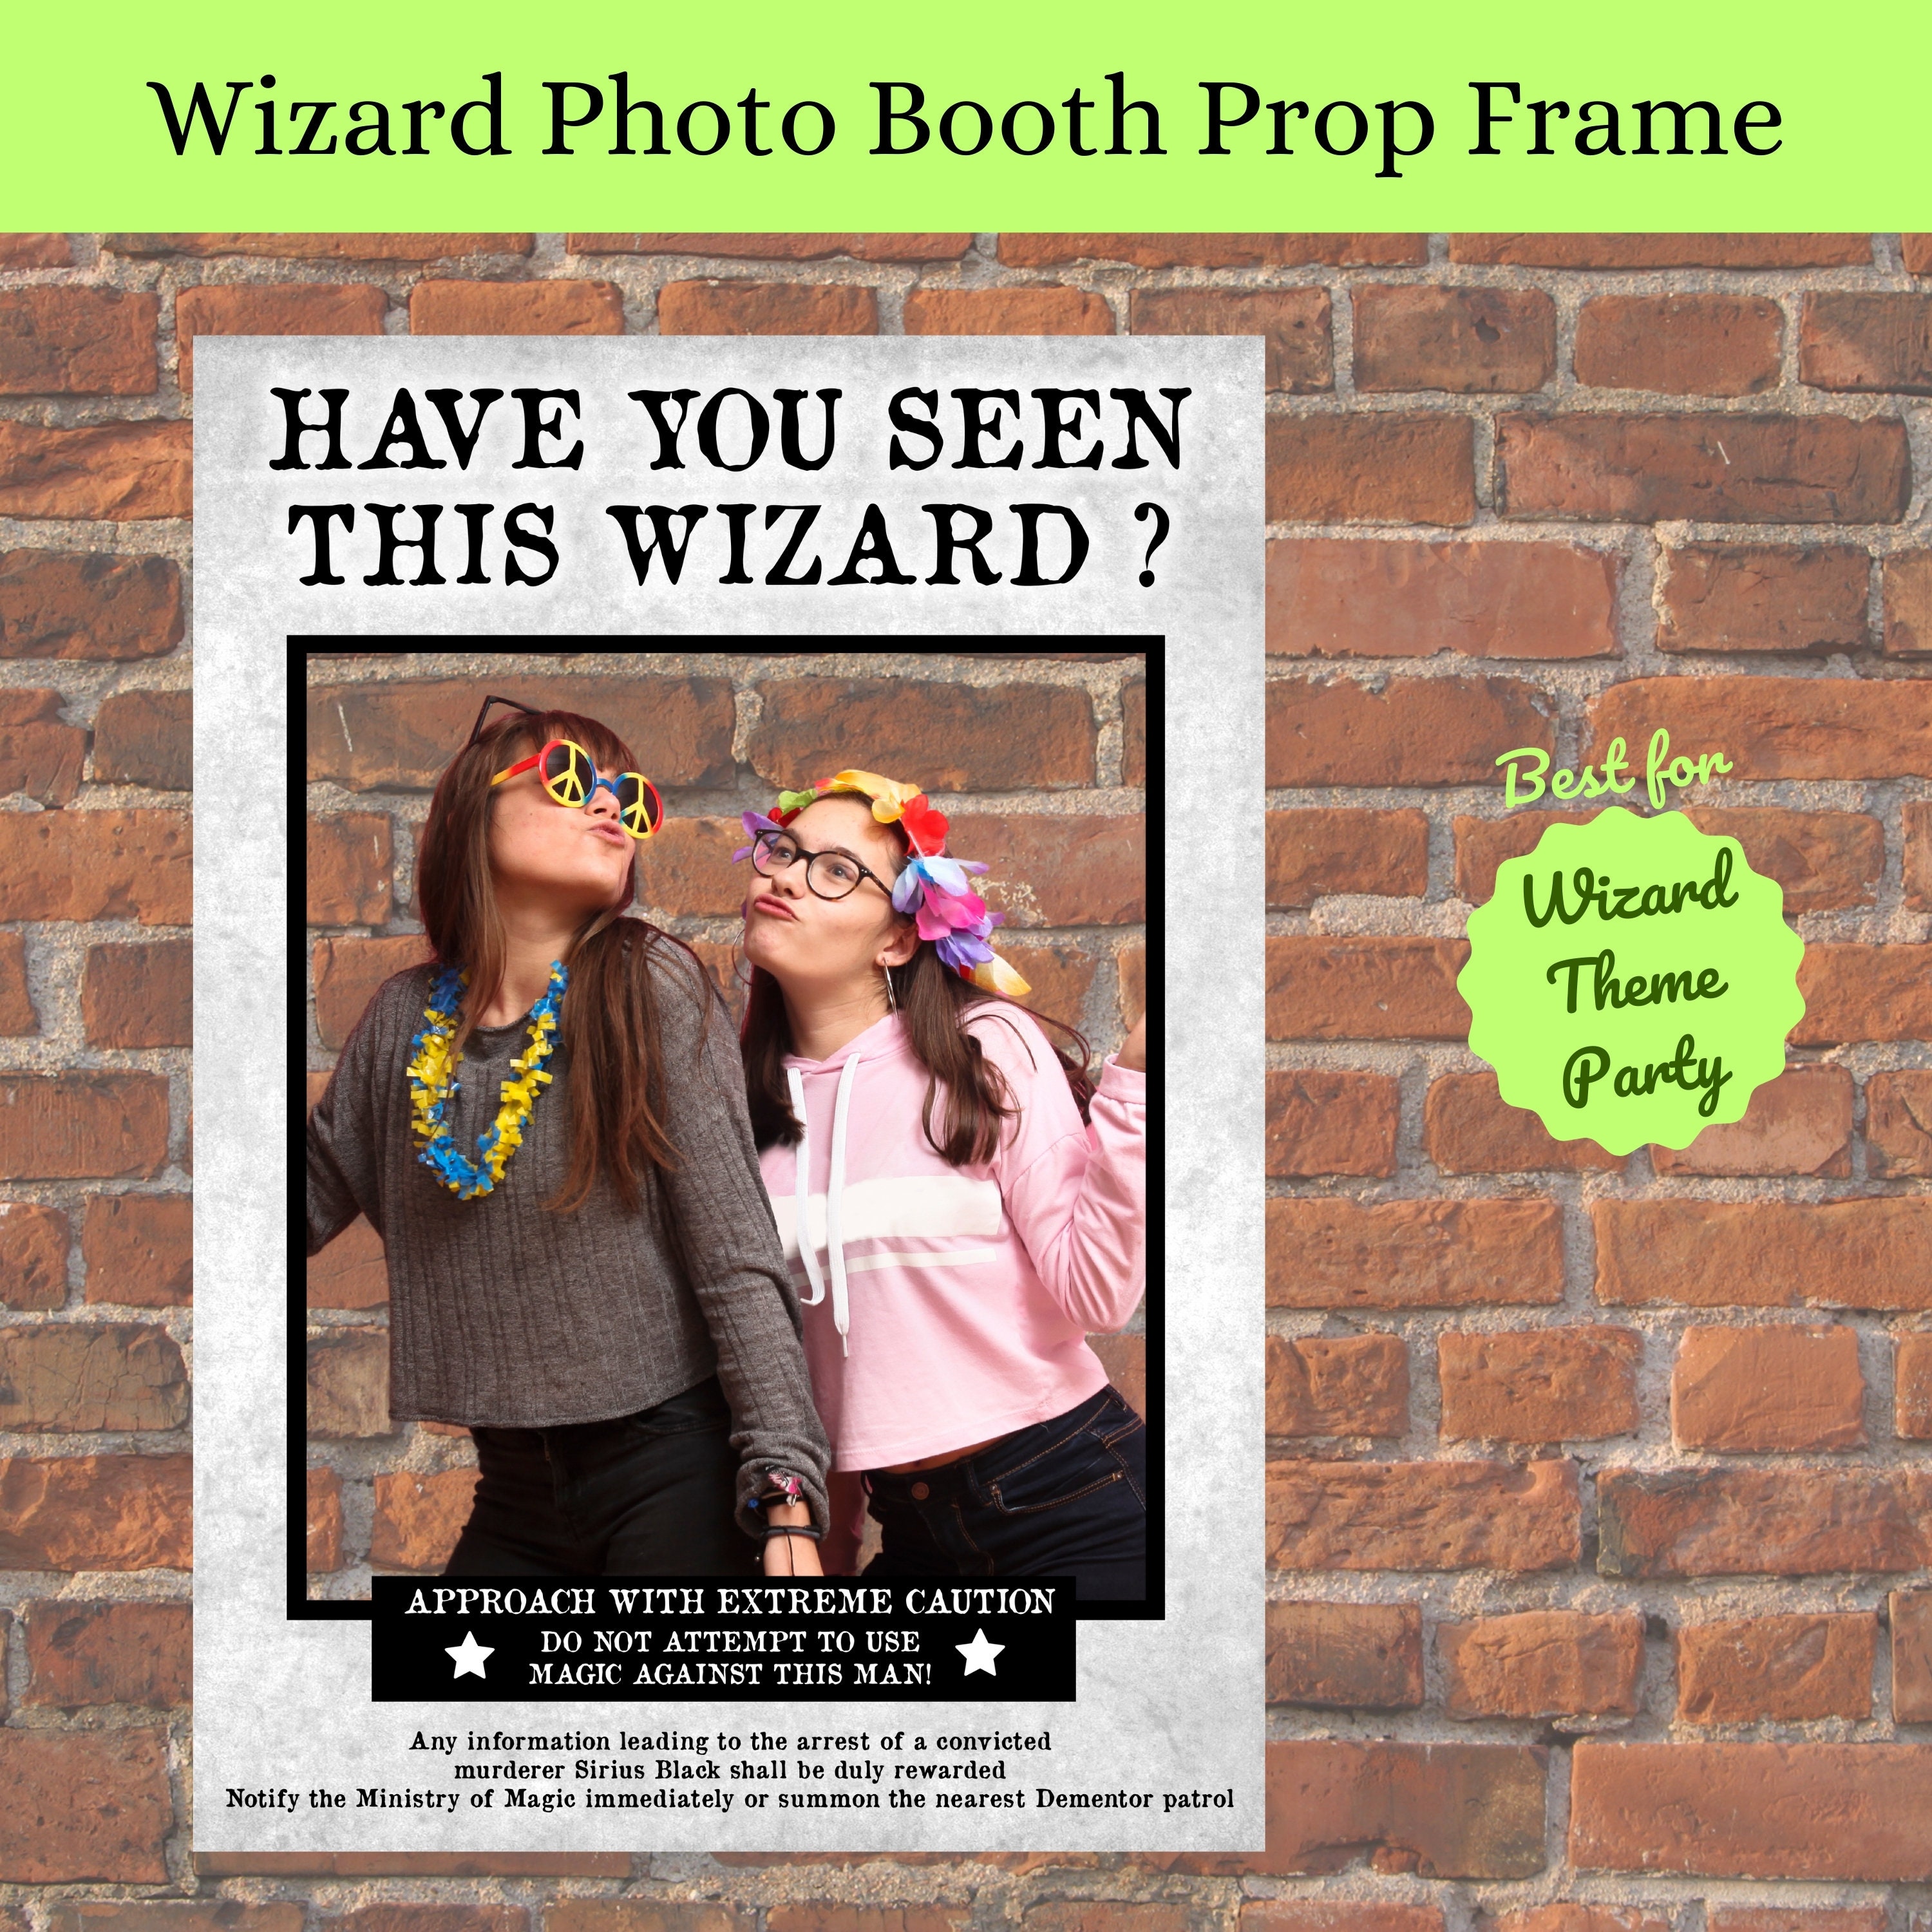 MuggleNet.com - These photo booth props are a must-have for a “Harry  Potter” party:    To learn more about how MuggleNet benefits from this post, visit